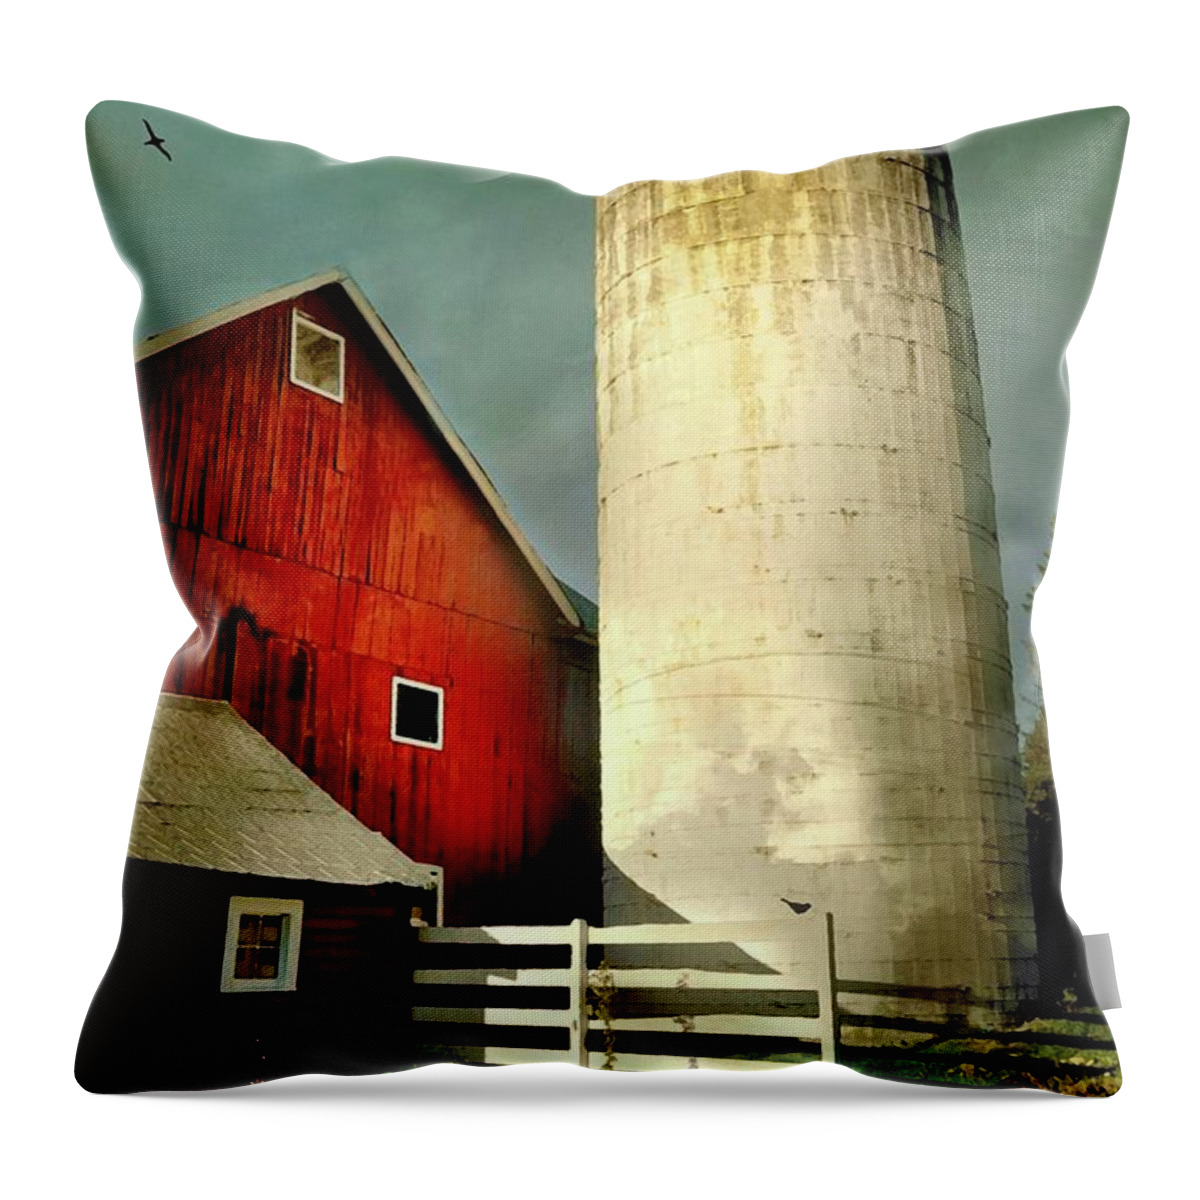 Autumn Landscape Throw Pillow featuring the photograph Autumn Silo by Diana Angstadt